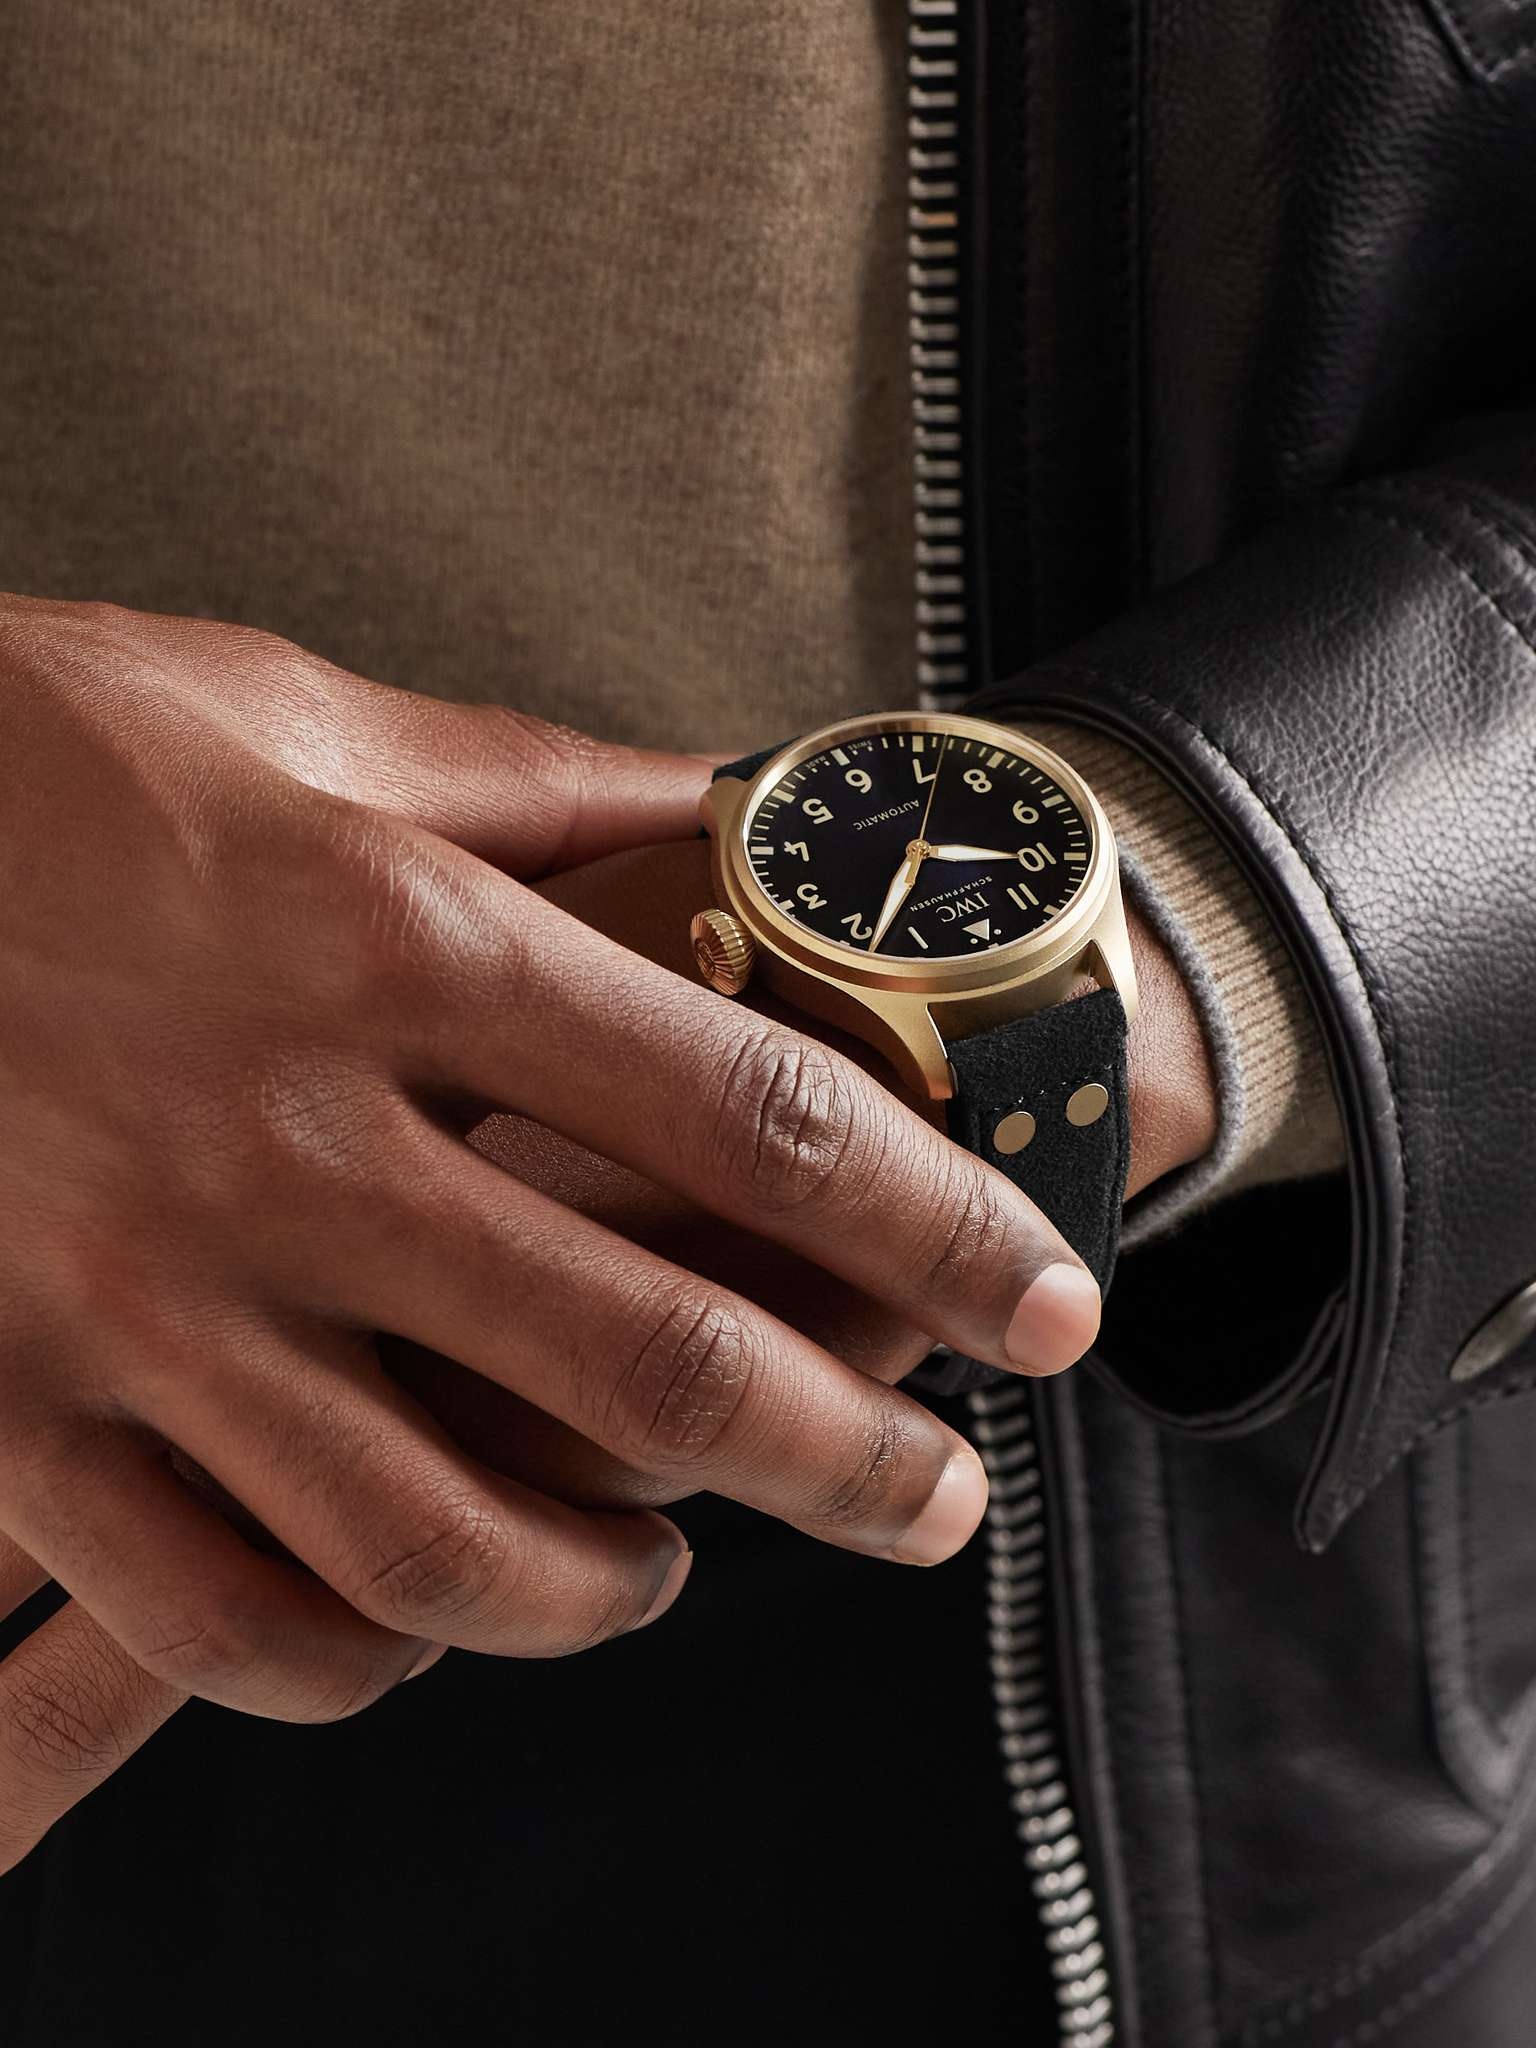 Big Pilot's 43 MR PORTER Edition 1 Limited-Edition Automatic 43mm Bronze and Alcantara Watch, Ref. N - 2